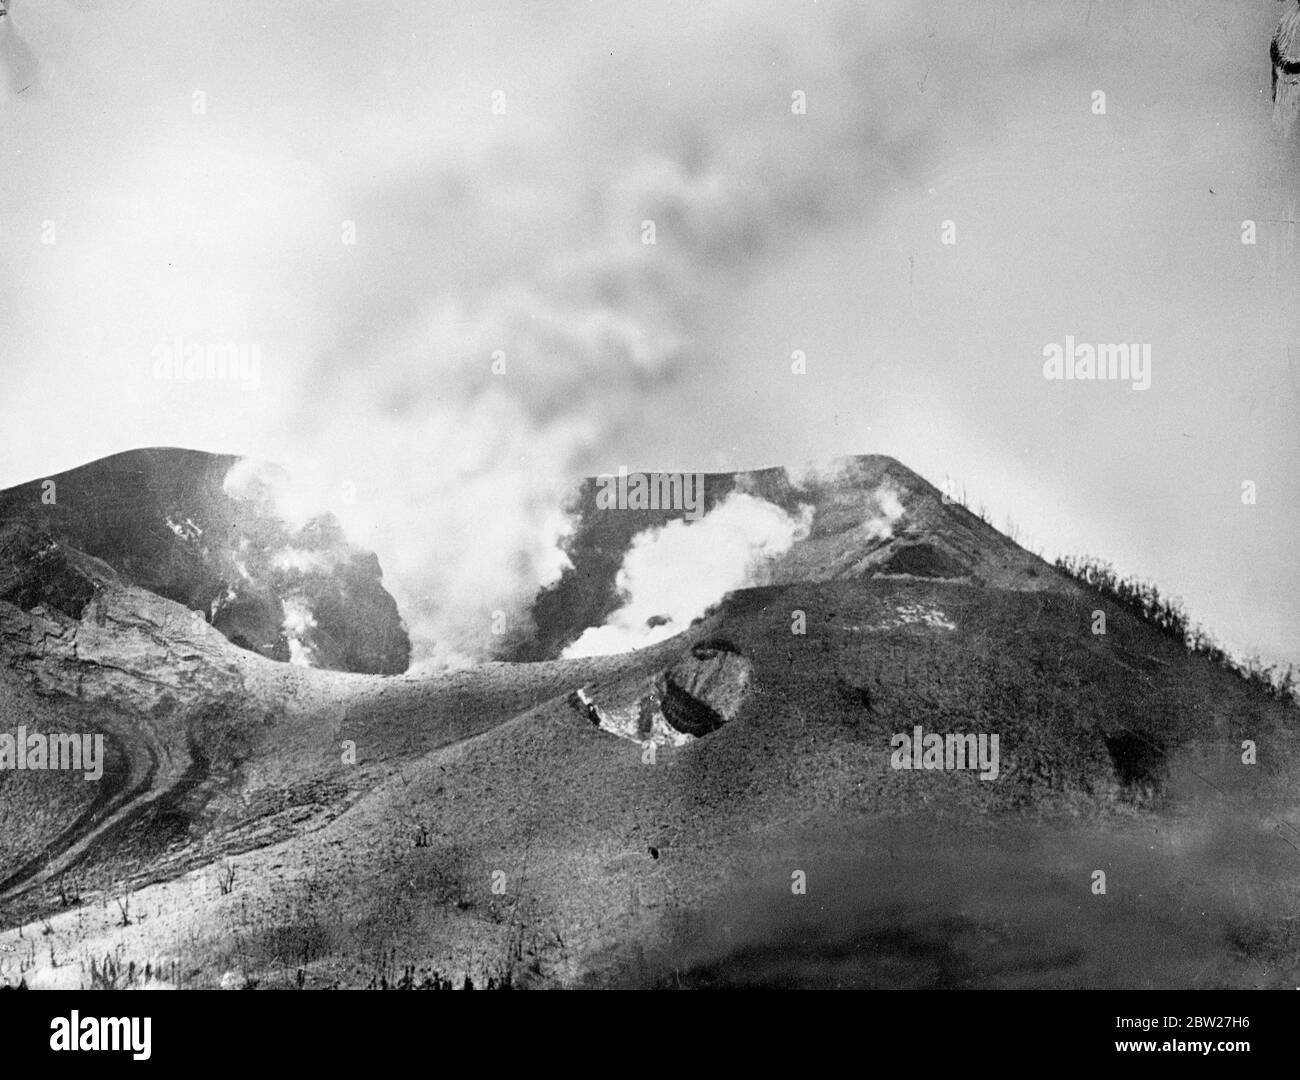 Smoke and volcanic mud pouring from the crater on Matupi Island. First pictures of volcano disaster on New Guinea islands. Three volcanoes, 2 on Vulcan Island and one on the Matupi Island, erupted violently showering pumice and mud on the roofs of Rabaul chief town of New Britain Island in New Guinea. A state of emergency was declared. 18 June 1937 Stock Photo